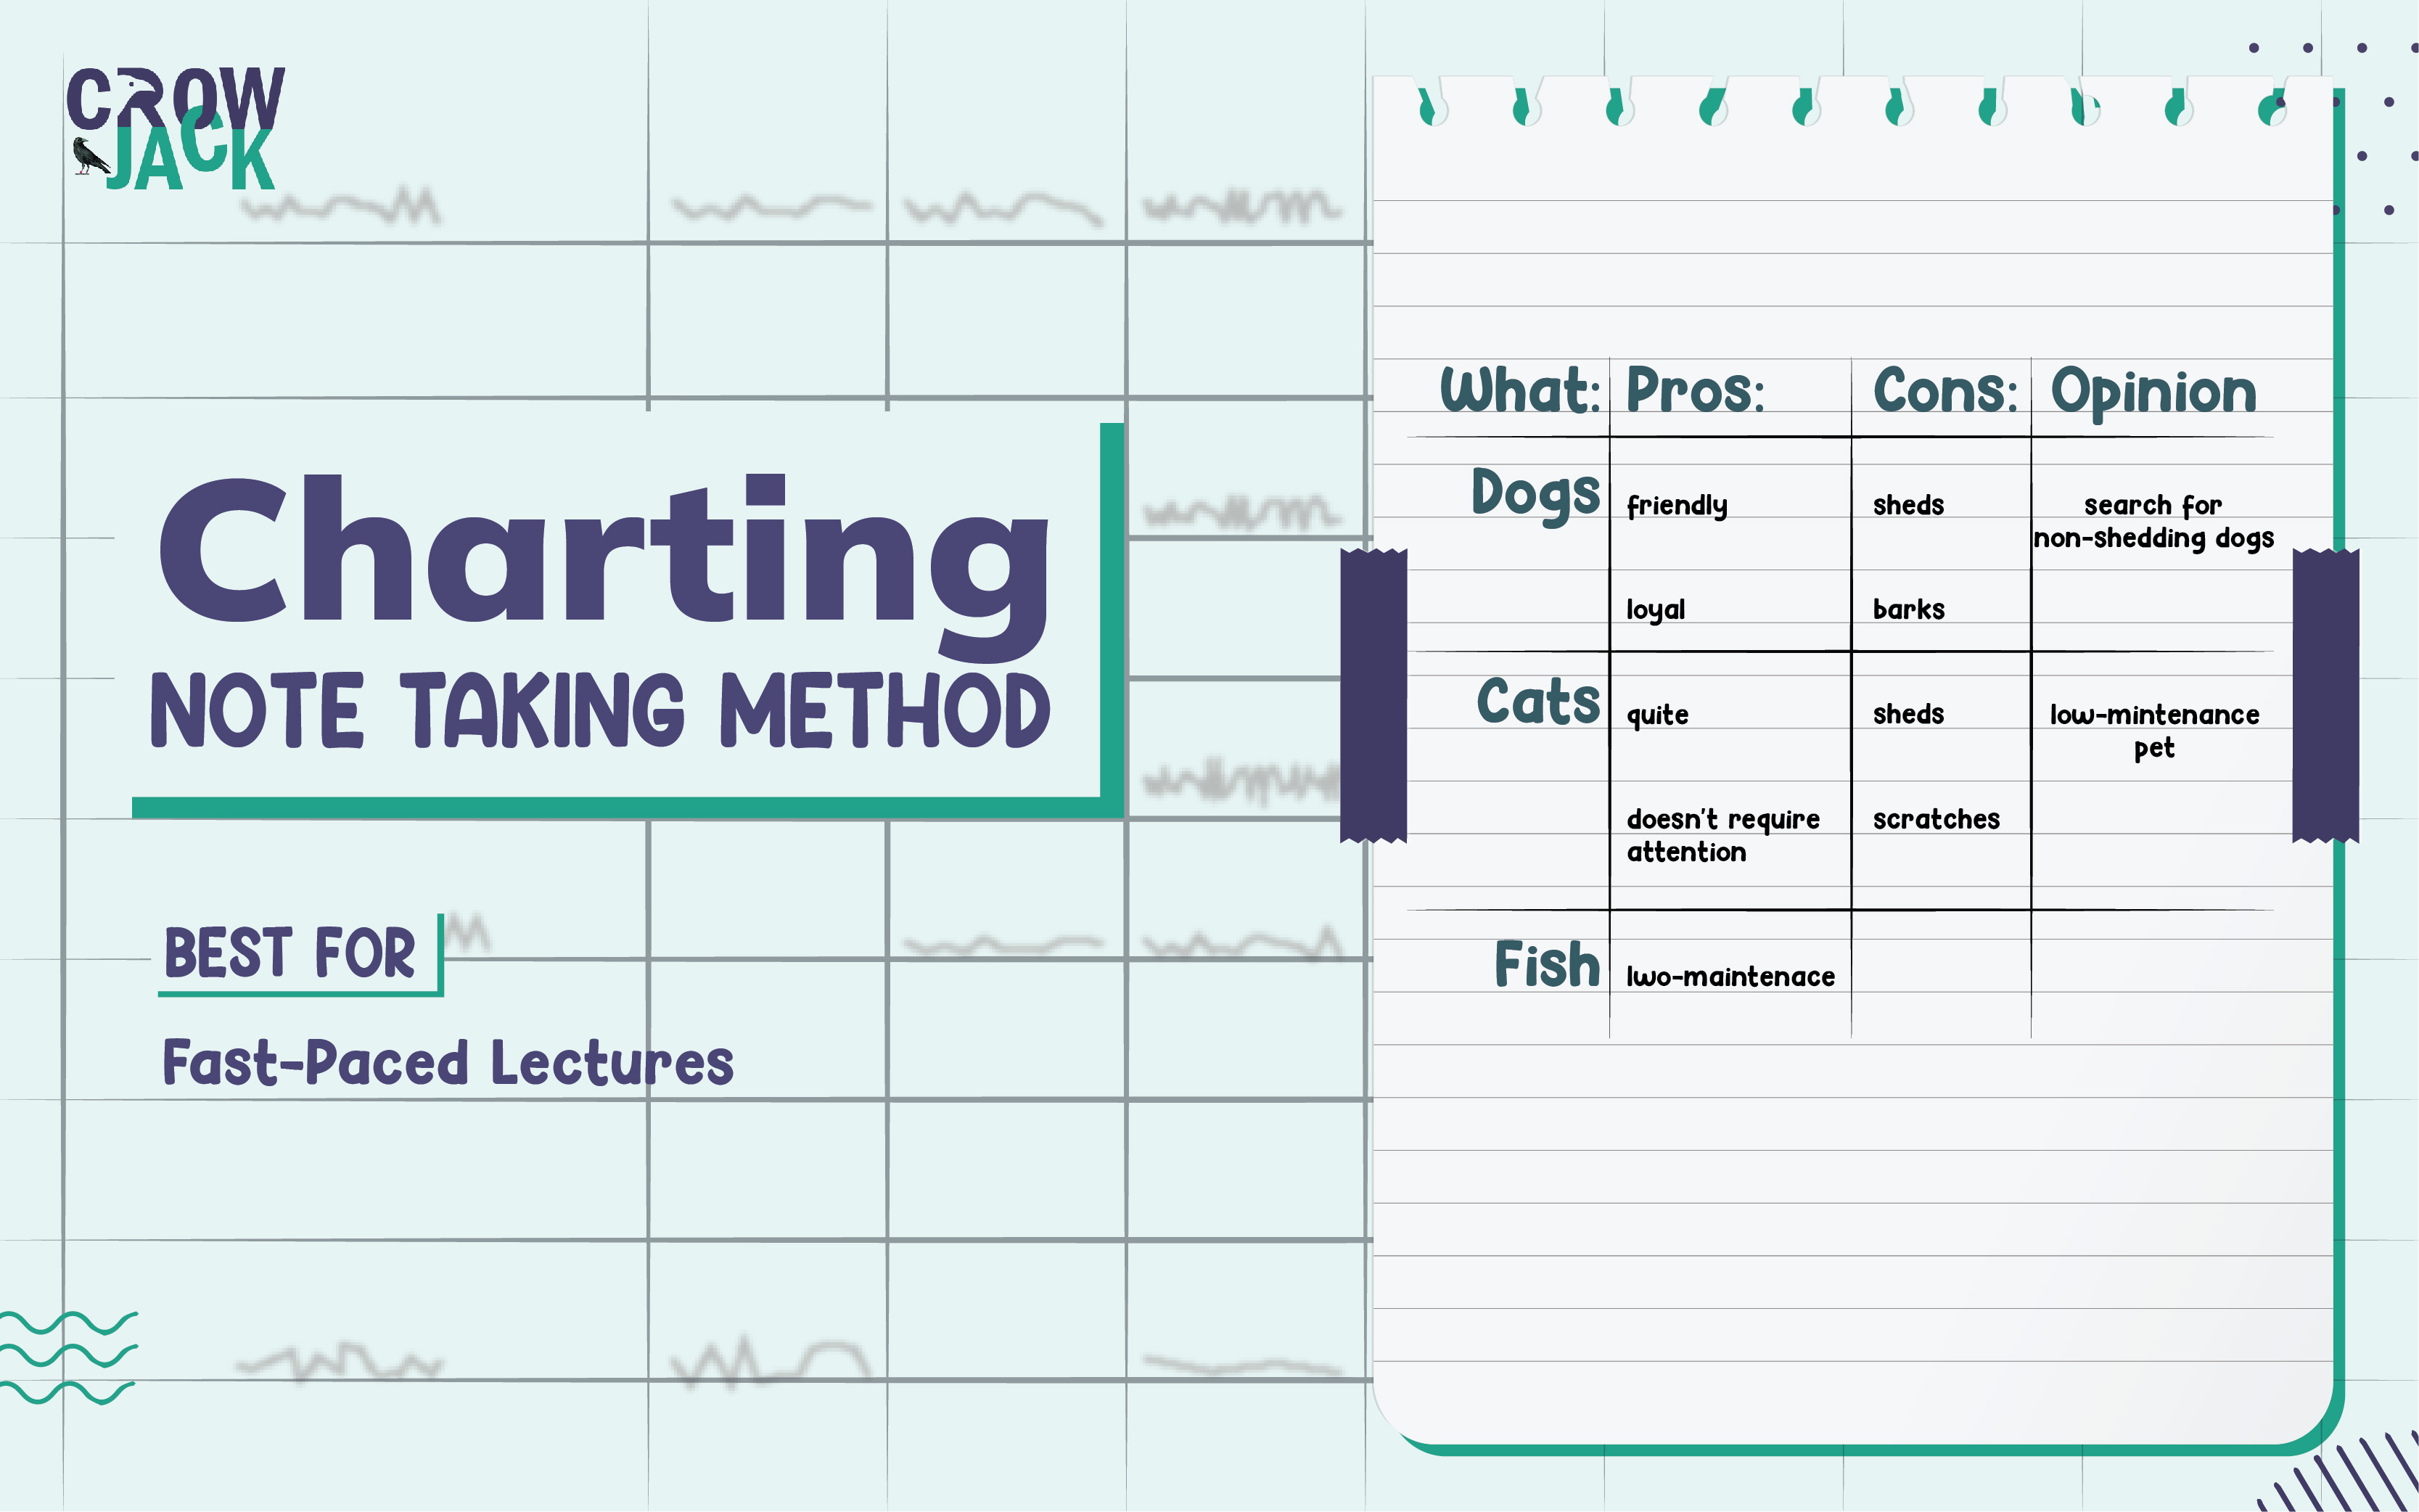 When to use the charting method for note taking